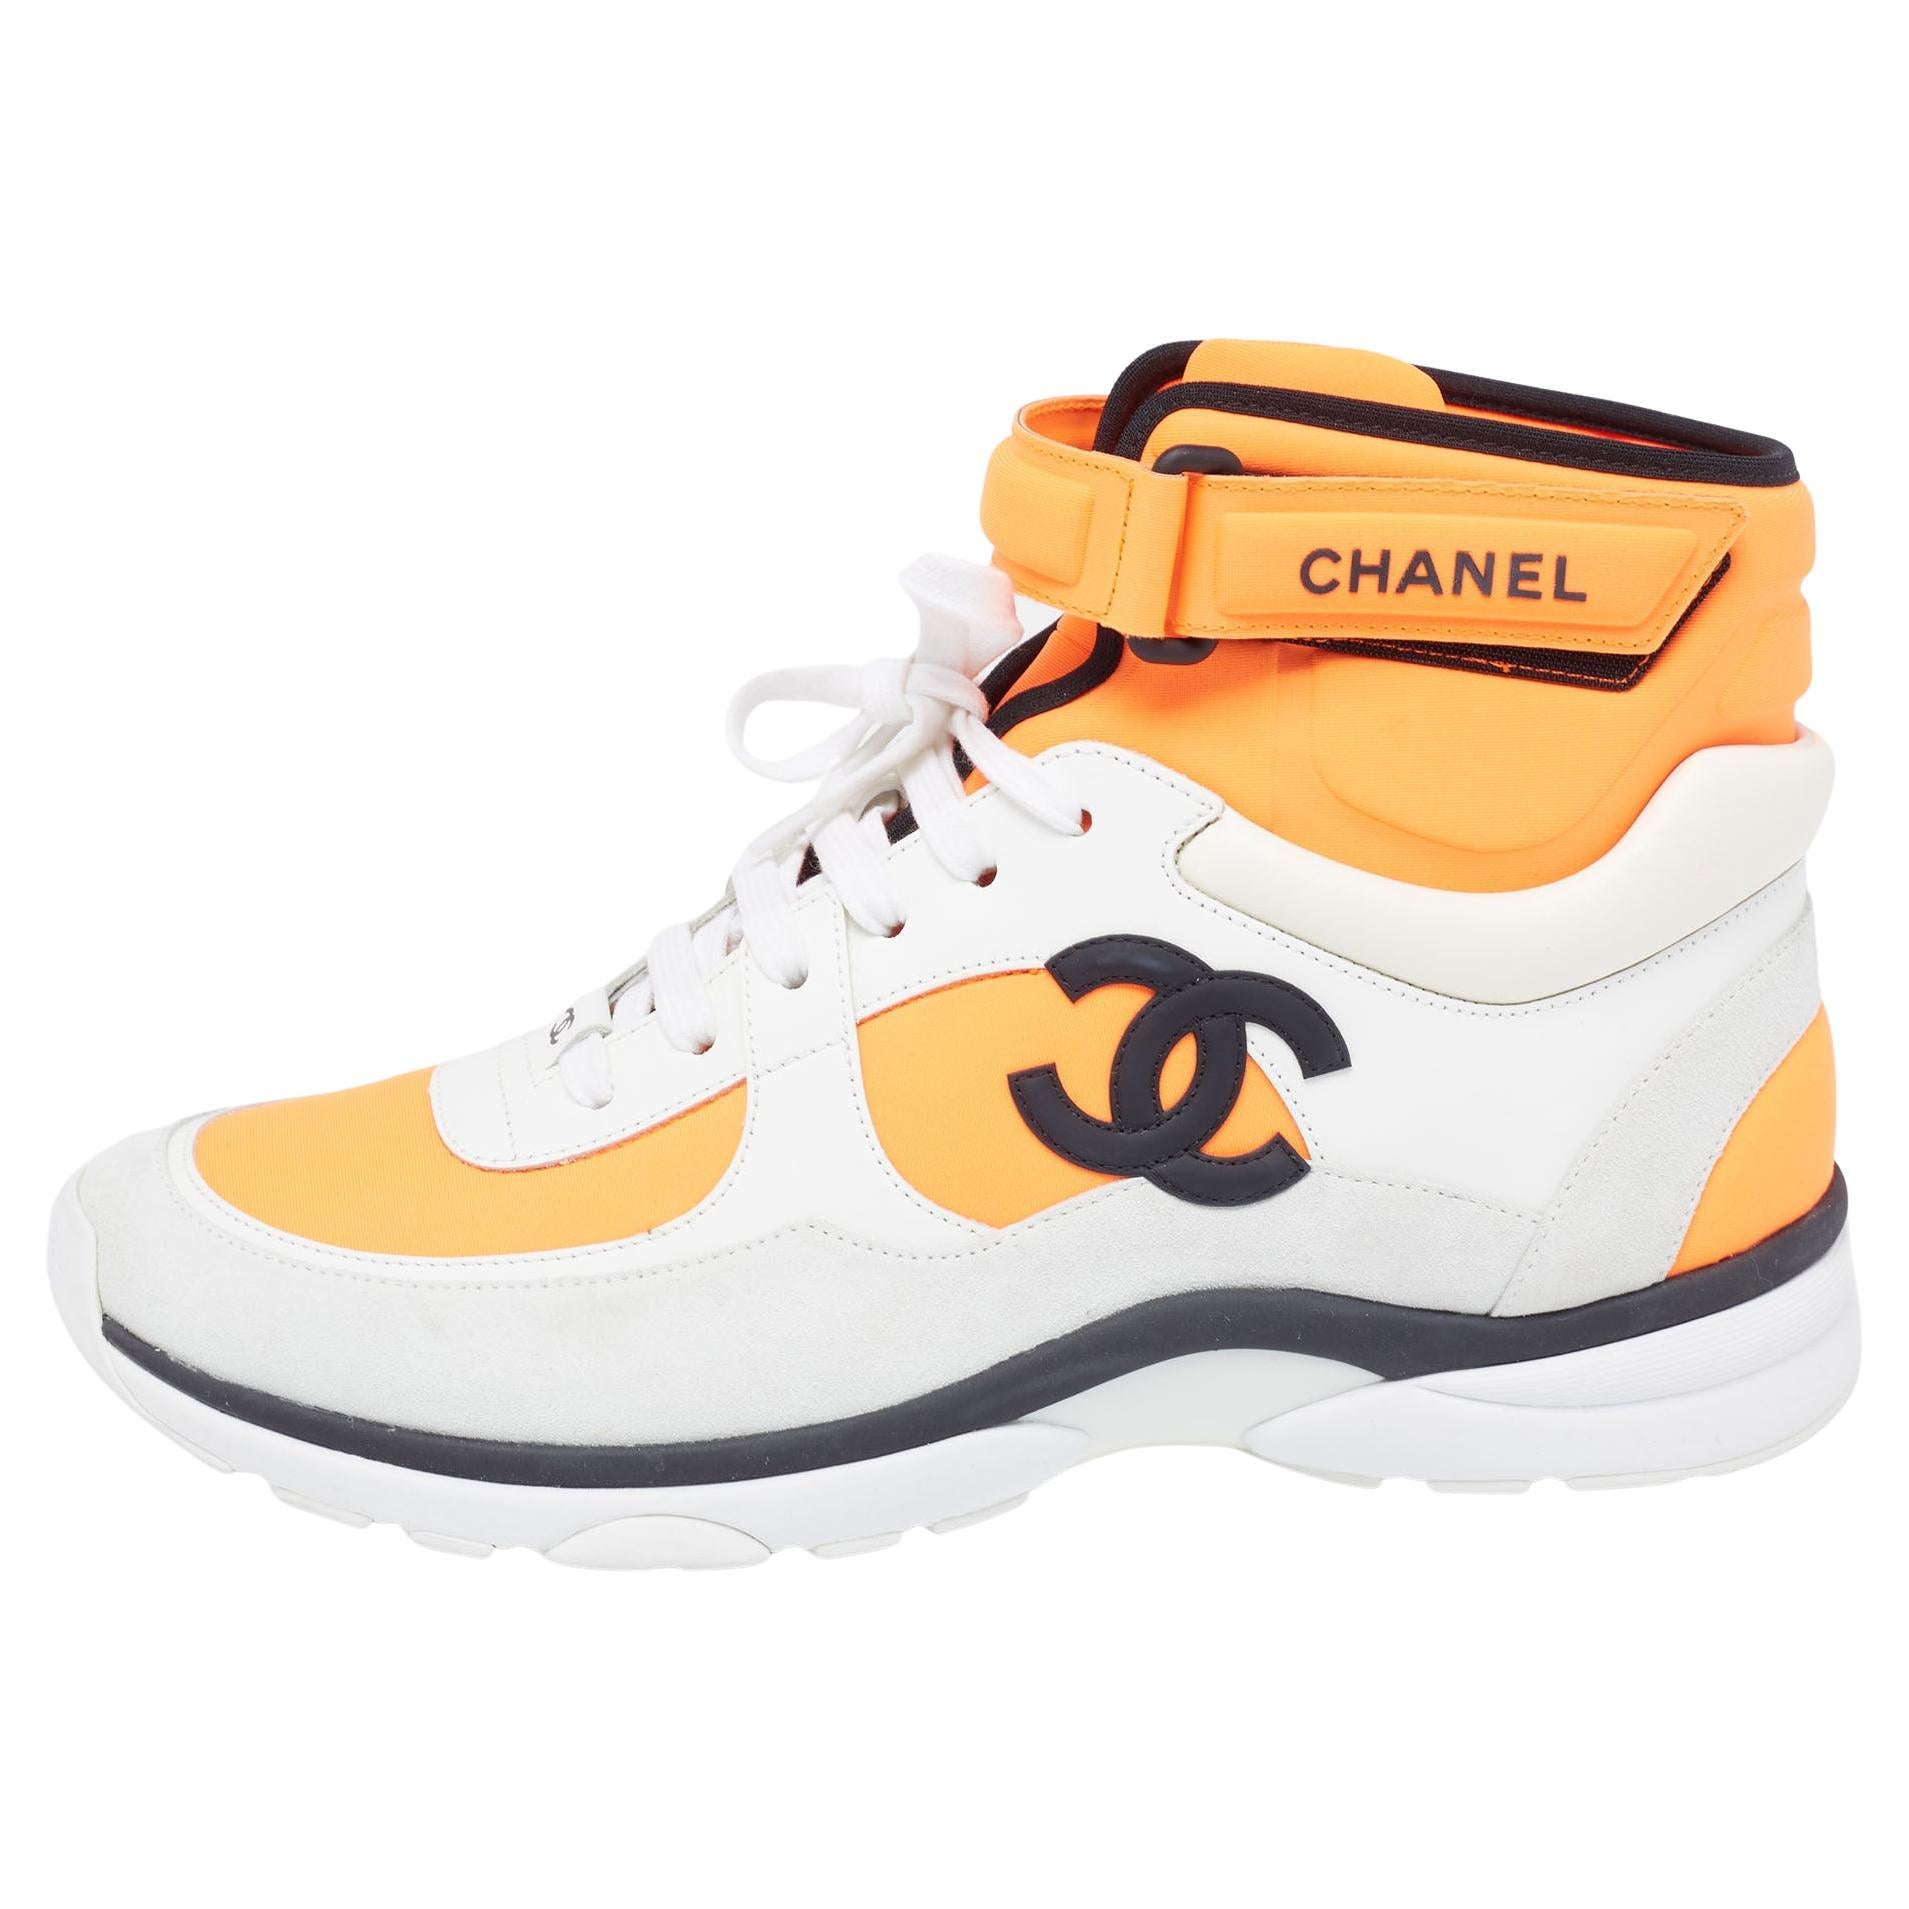 Chanel Sneakers Size 42 - 3 For Sale on 1stDibs | chanel sneakers 42, chanel  shoes 42